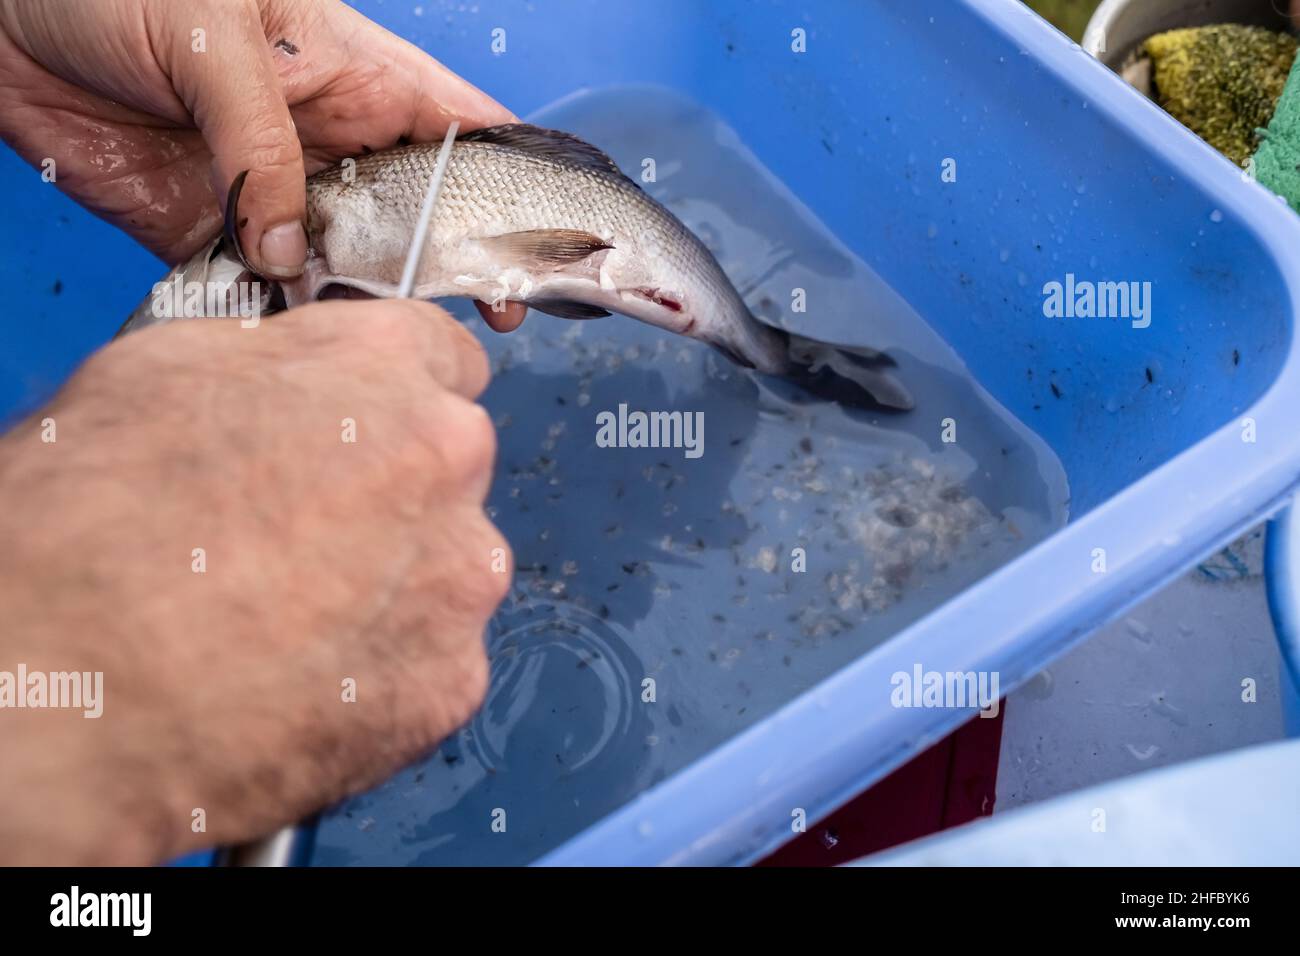 Male hands clean freshly caught fish with a knife, over a basin of water. Cooking process.  Stock Photo